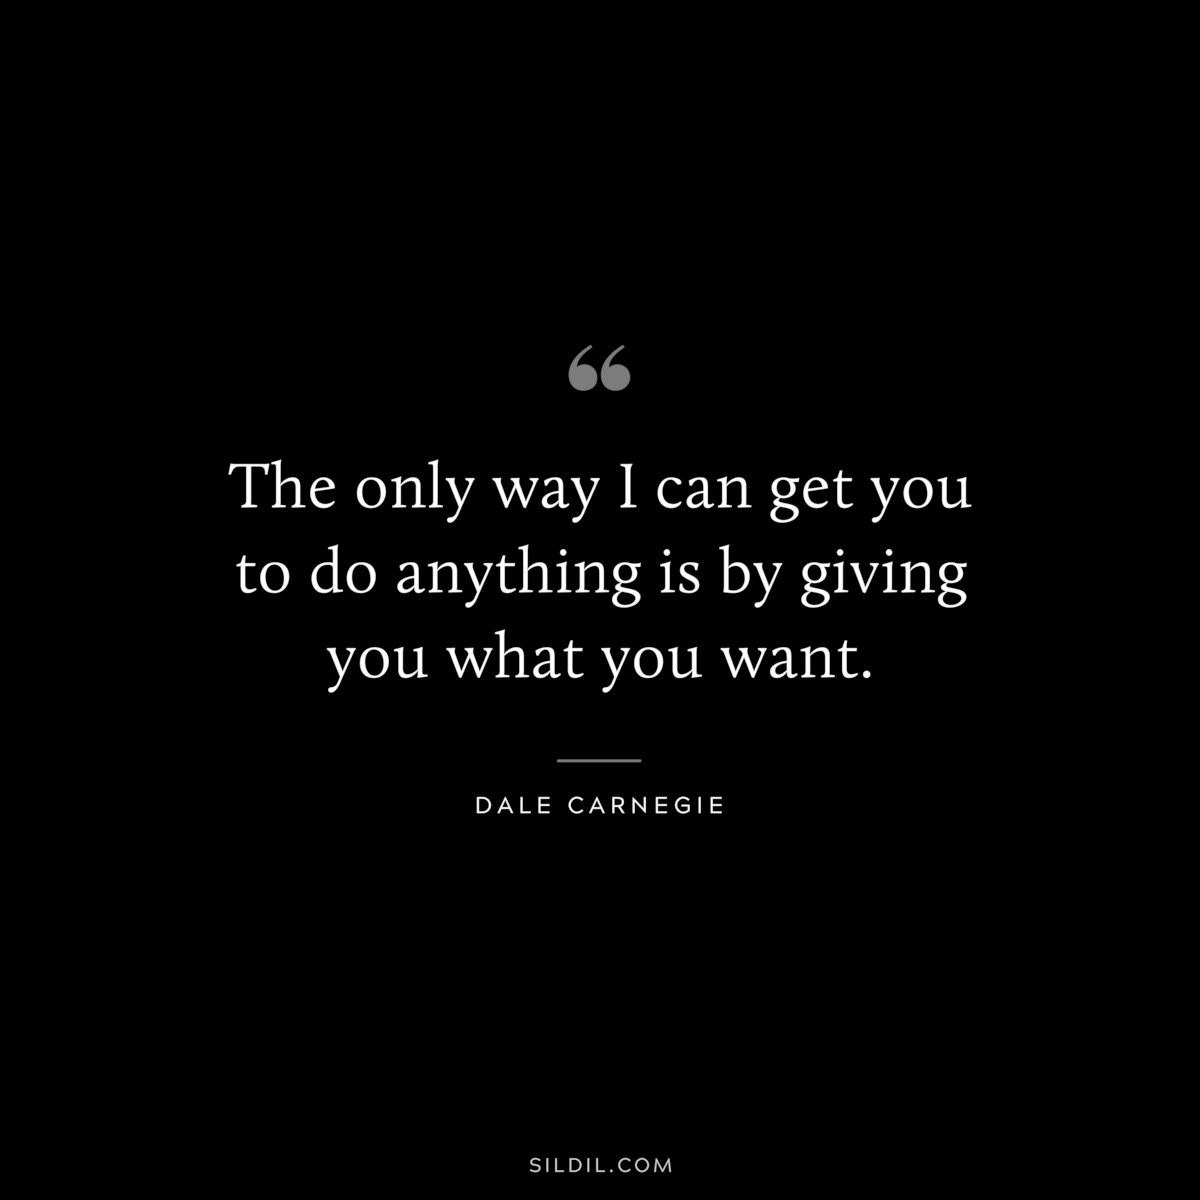 The only way I can get you to do anything is by giving you what you want.― Dale Carnegie